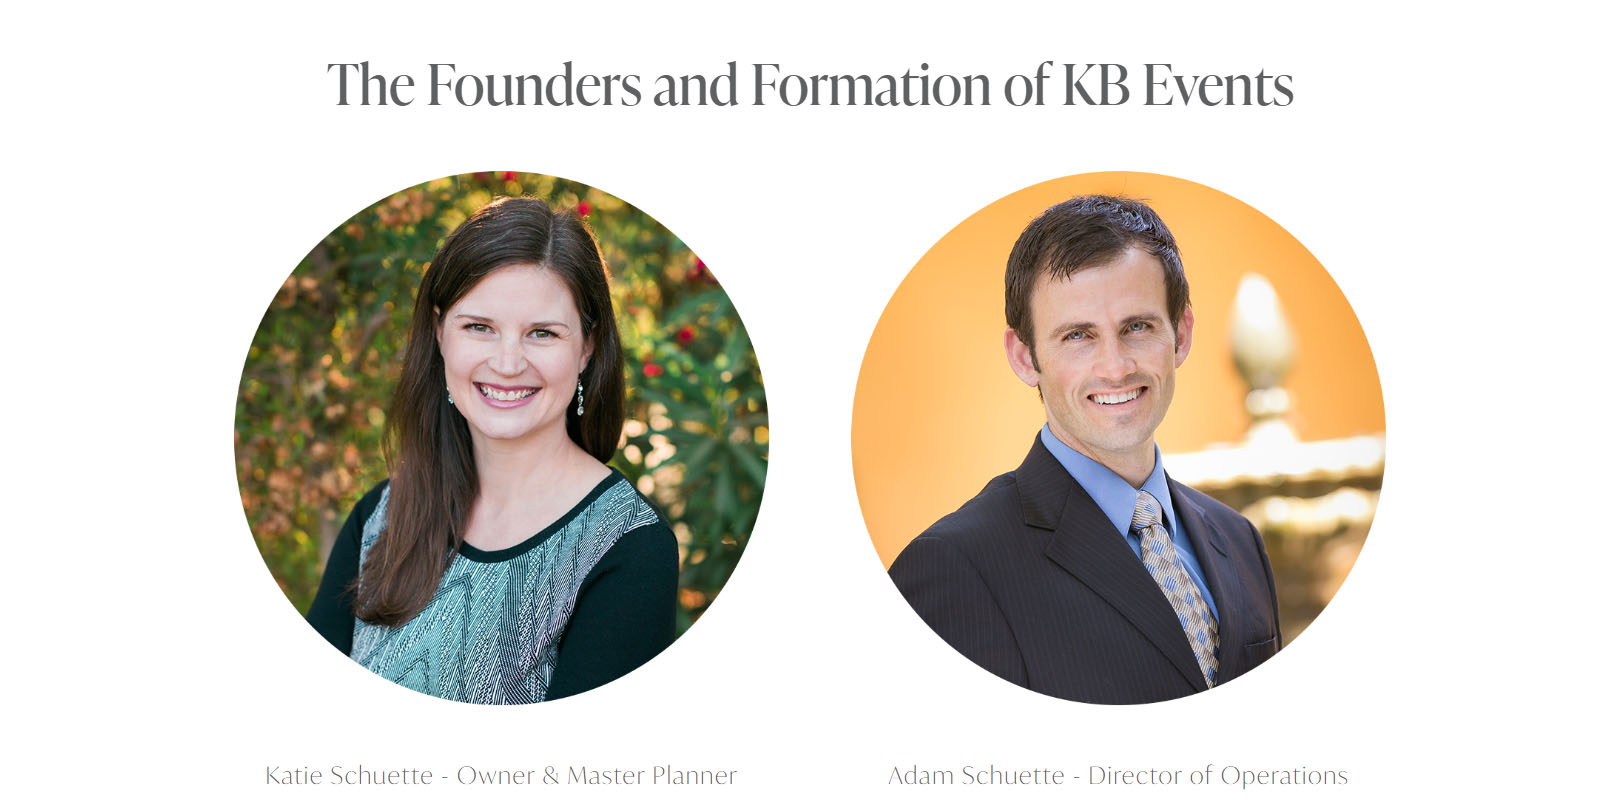 The owners of KB Events.